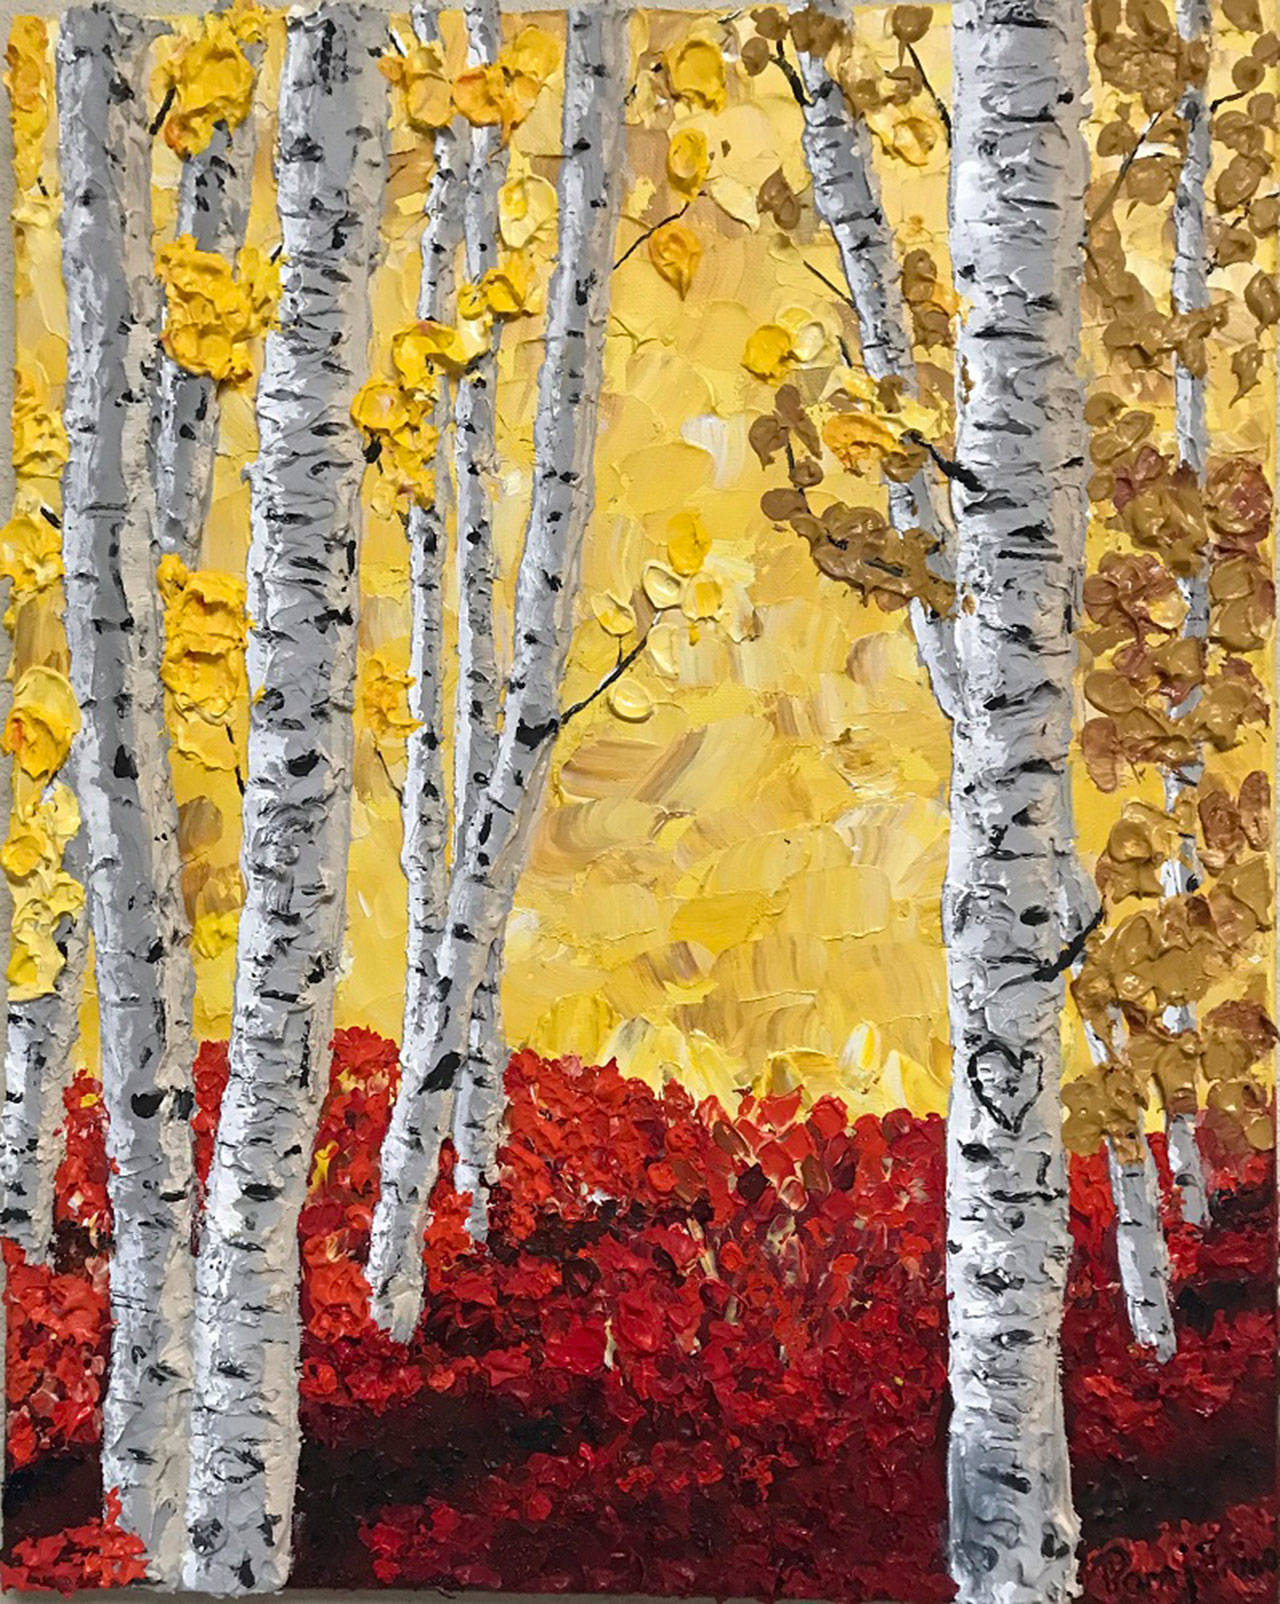 “Fall Birch” by Pam Fries, a featured artist at the Blue Whole Gallery in Sequim this April. Submitted art